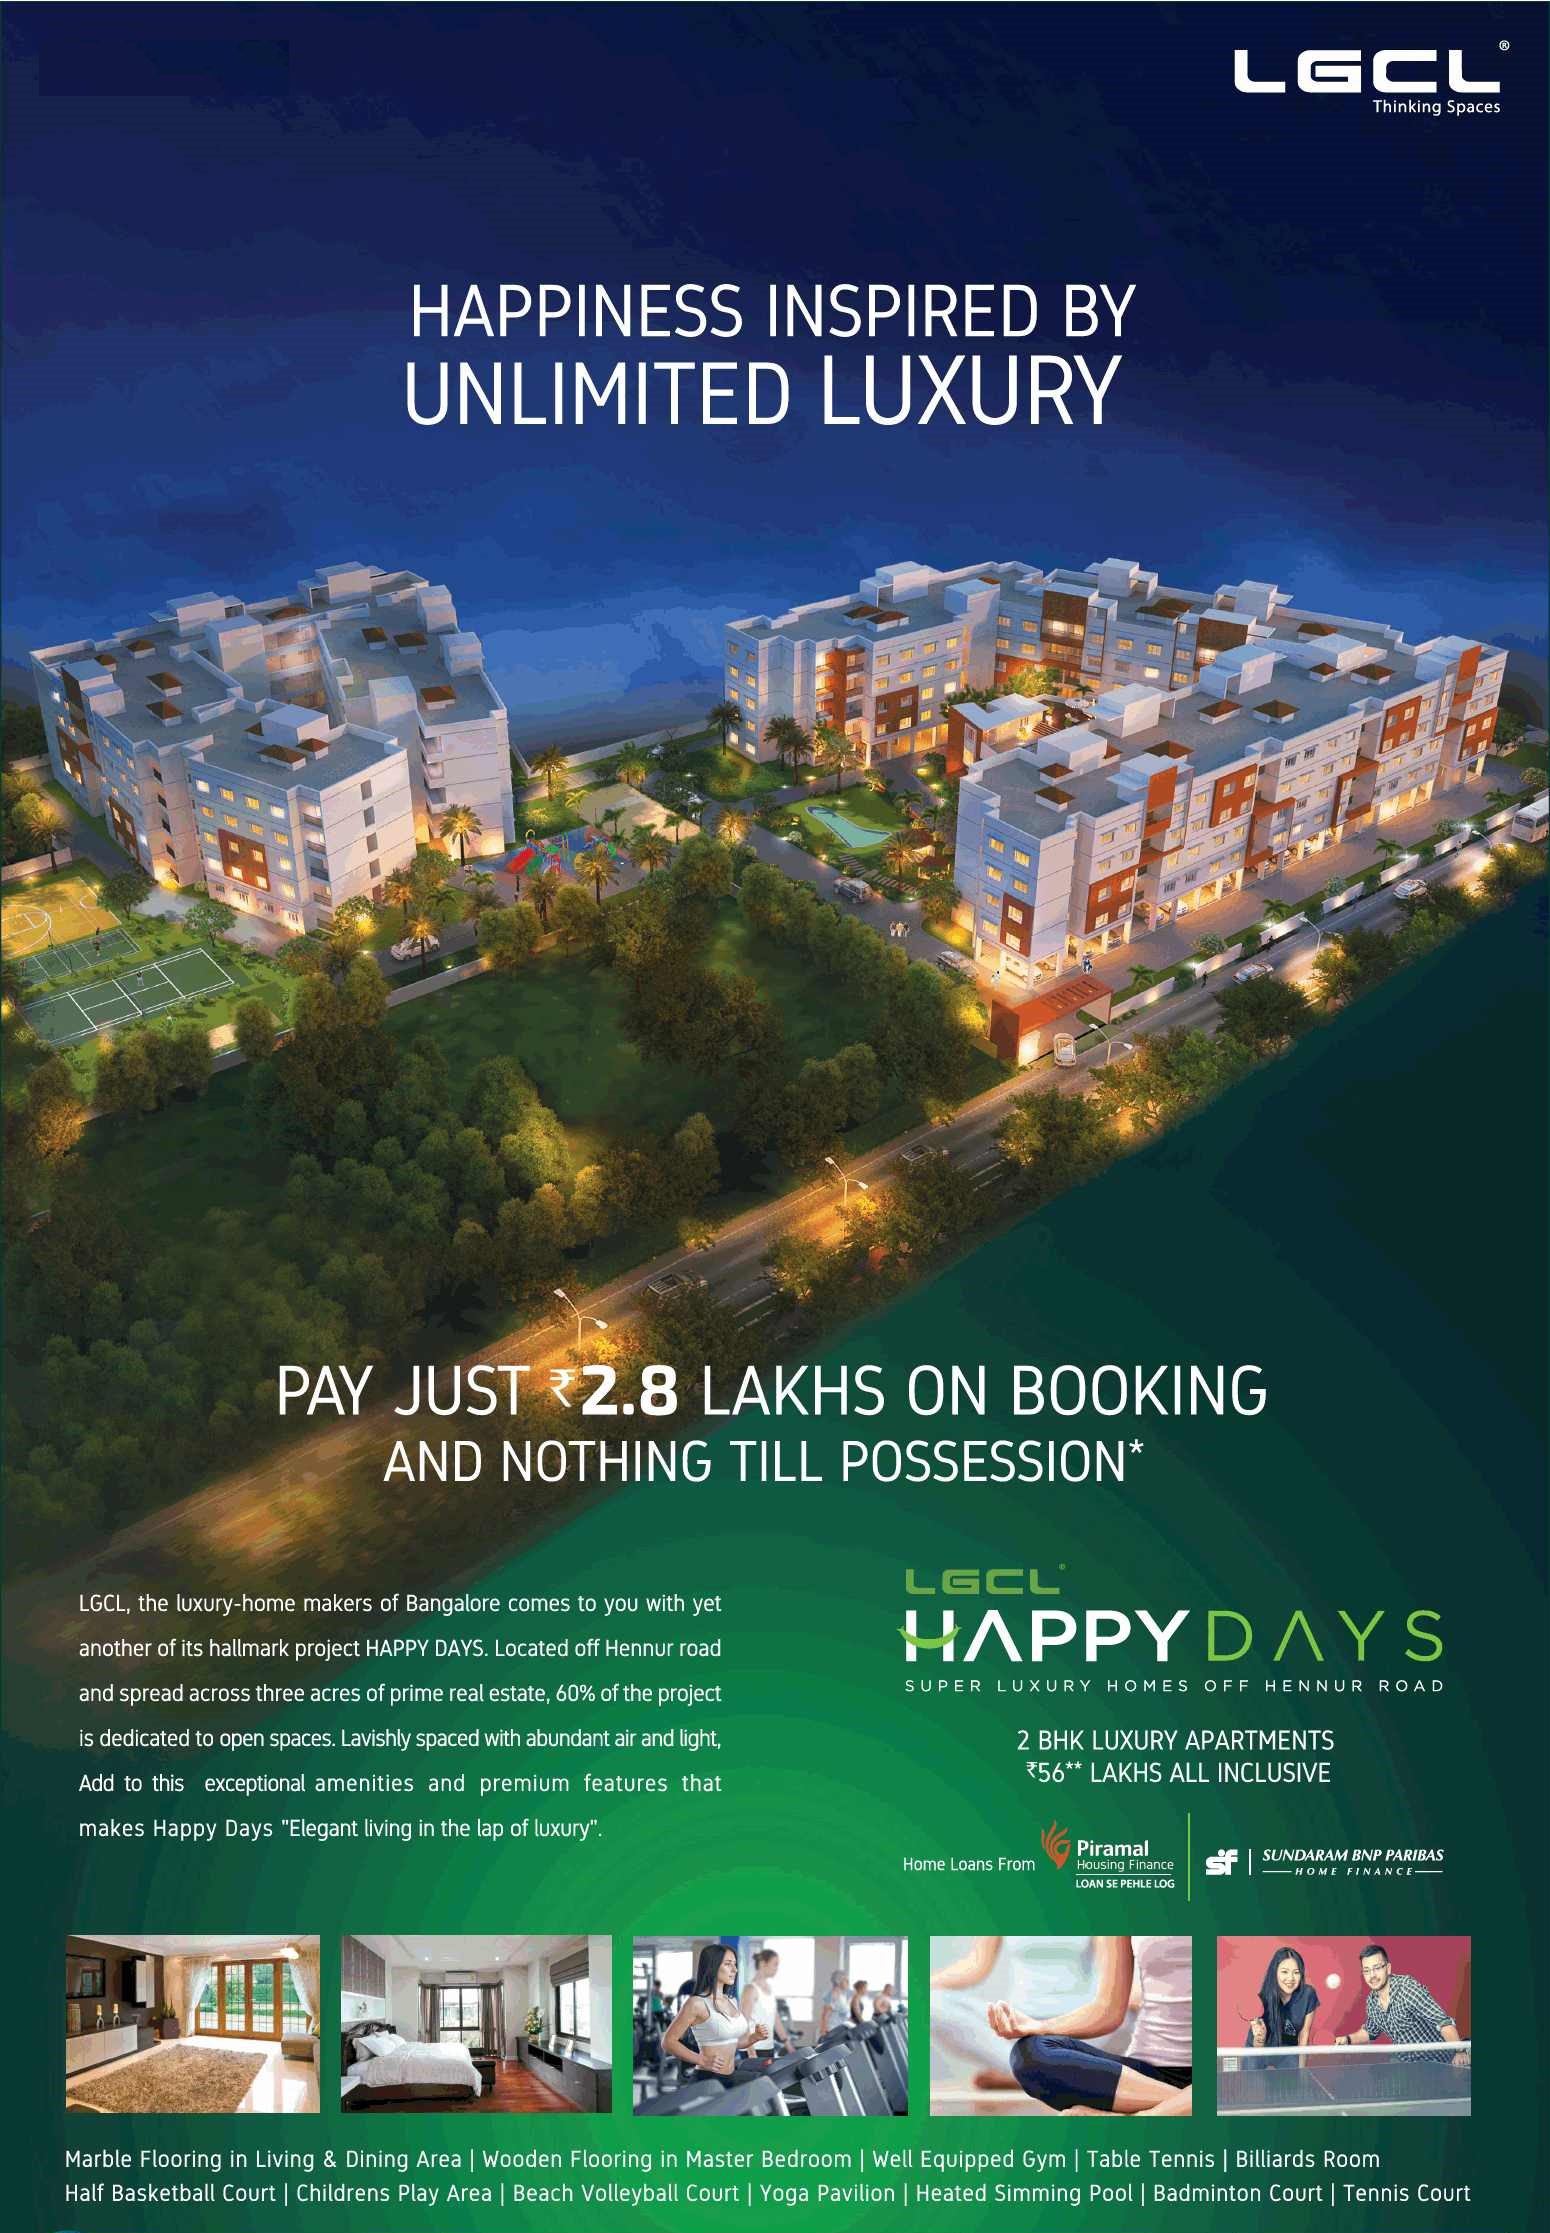 Pay just Rs. 2.8 lakhs on booking & nothing till possession at LGCL Happy Days in Bangalore Update